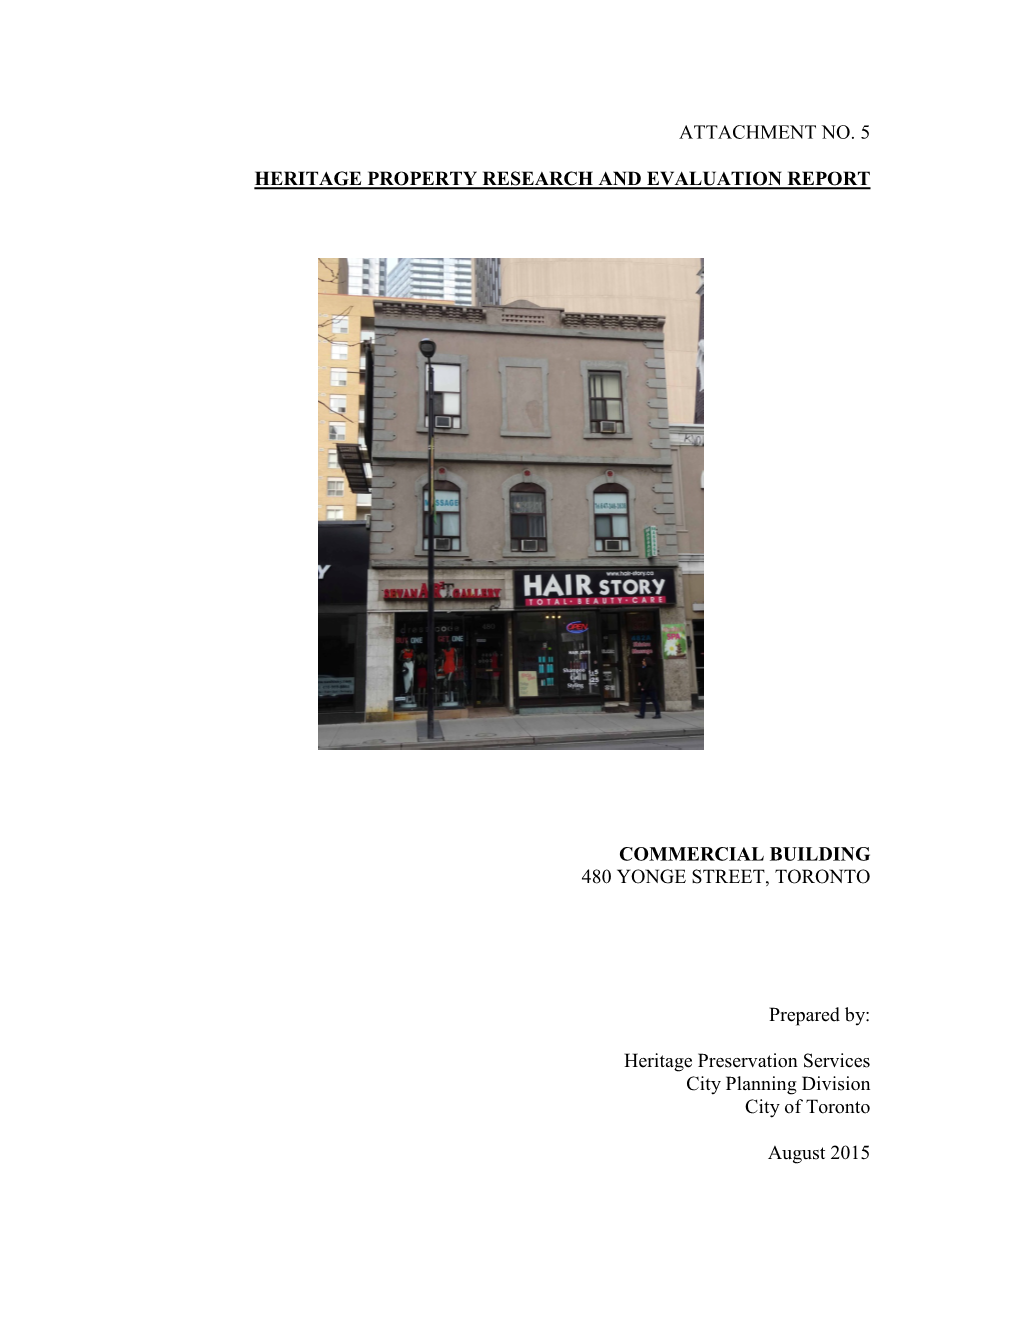 Heritage Property Research and Evaluation Report